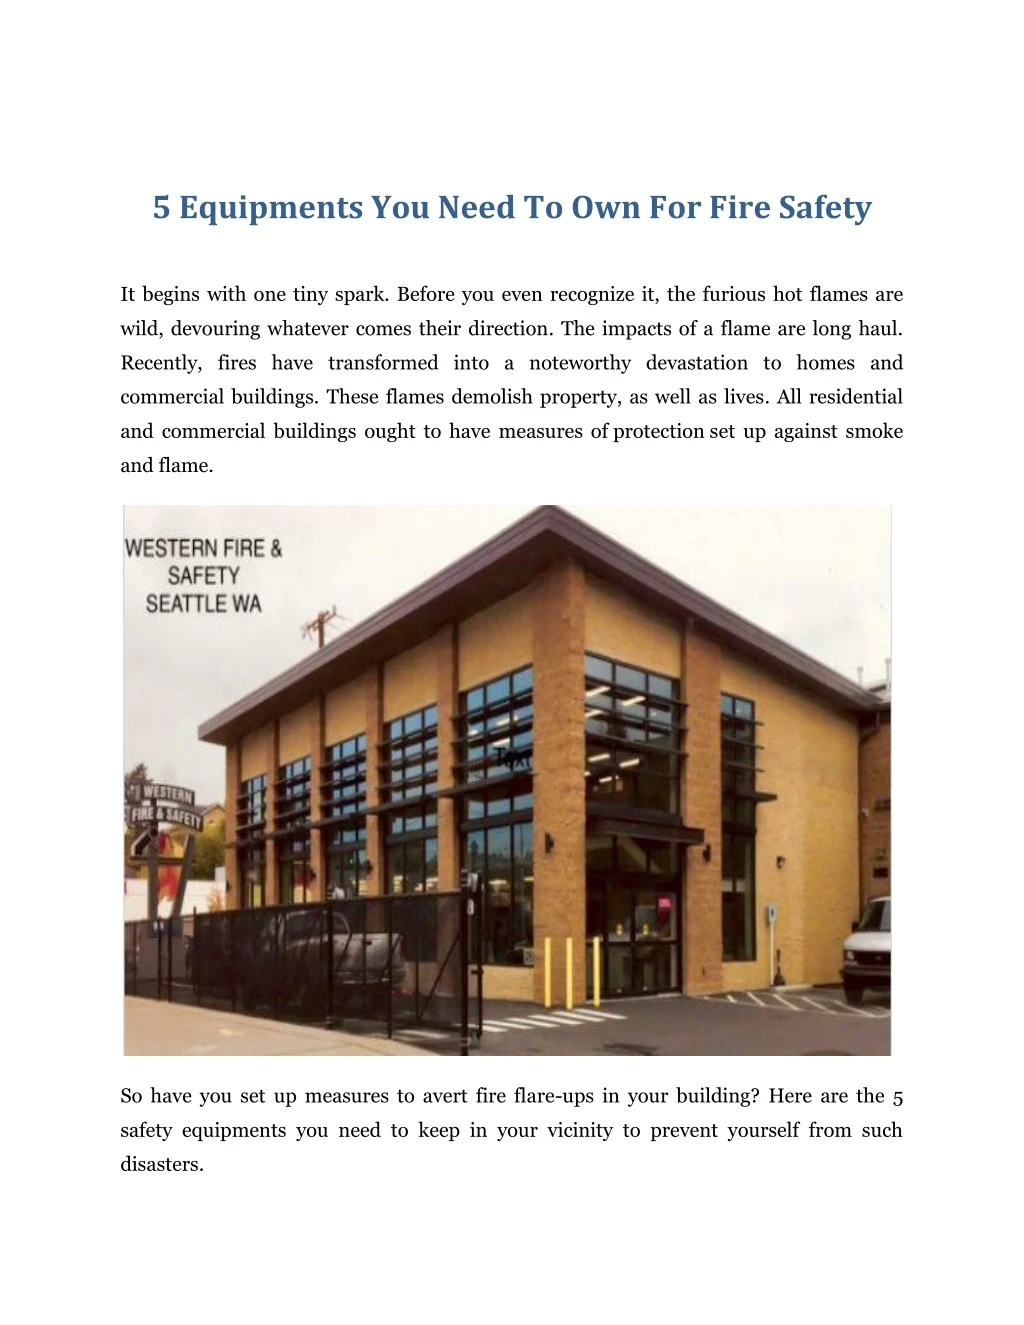 5 equipments you need to own for fire safety